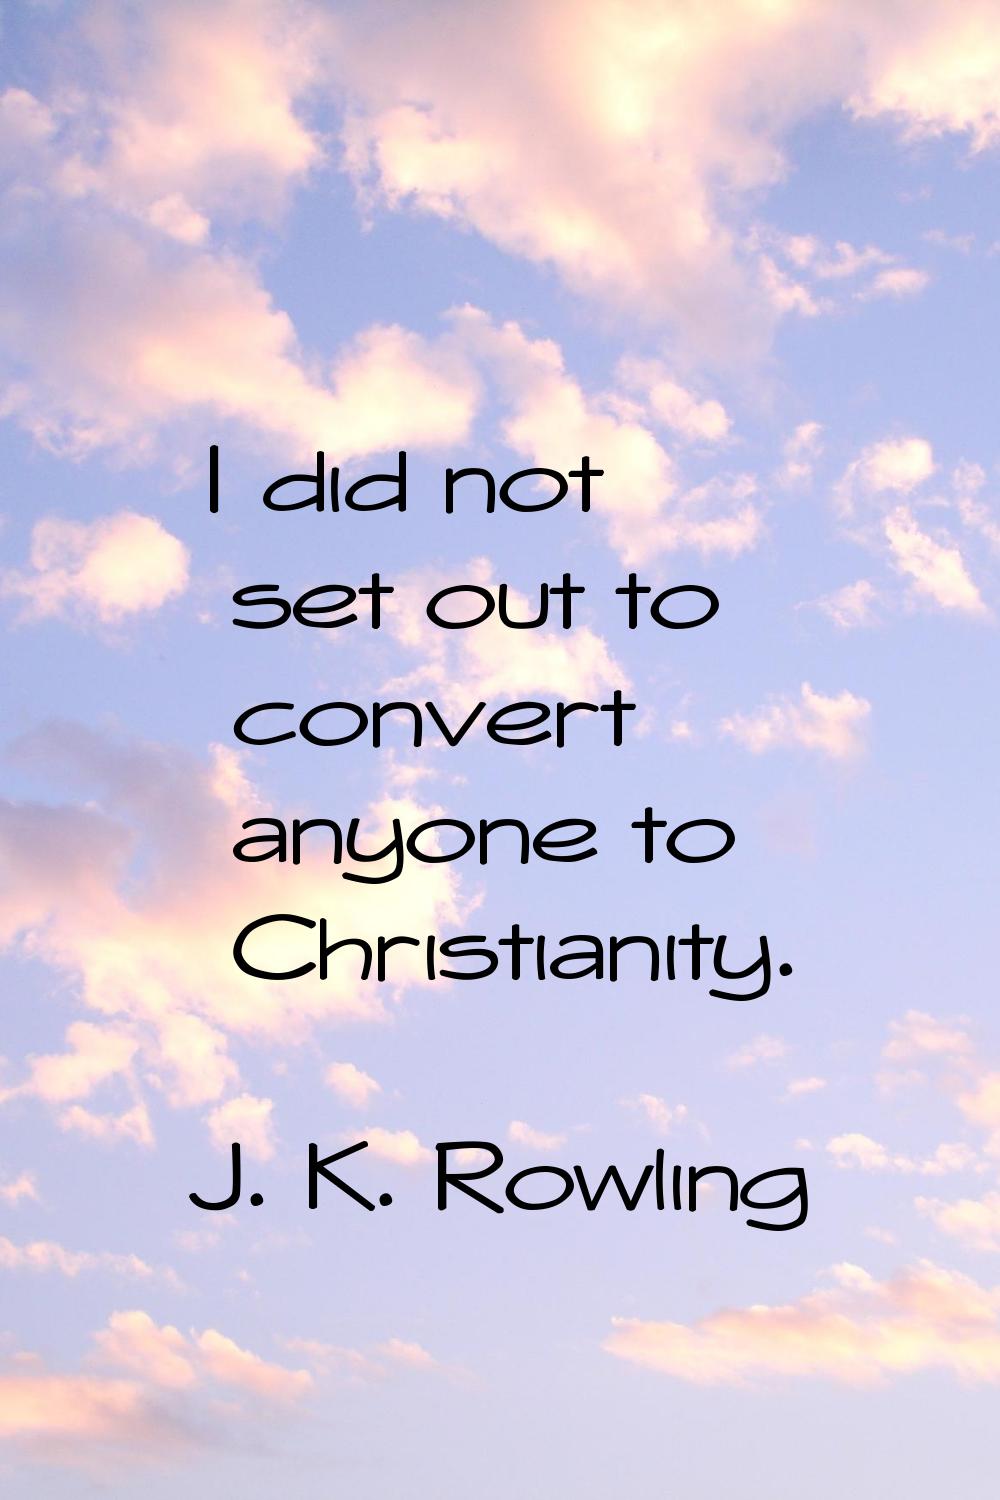 I did not set out to convert anyone to Christianity.